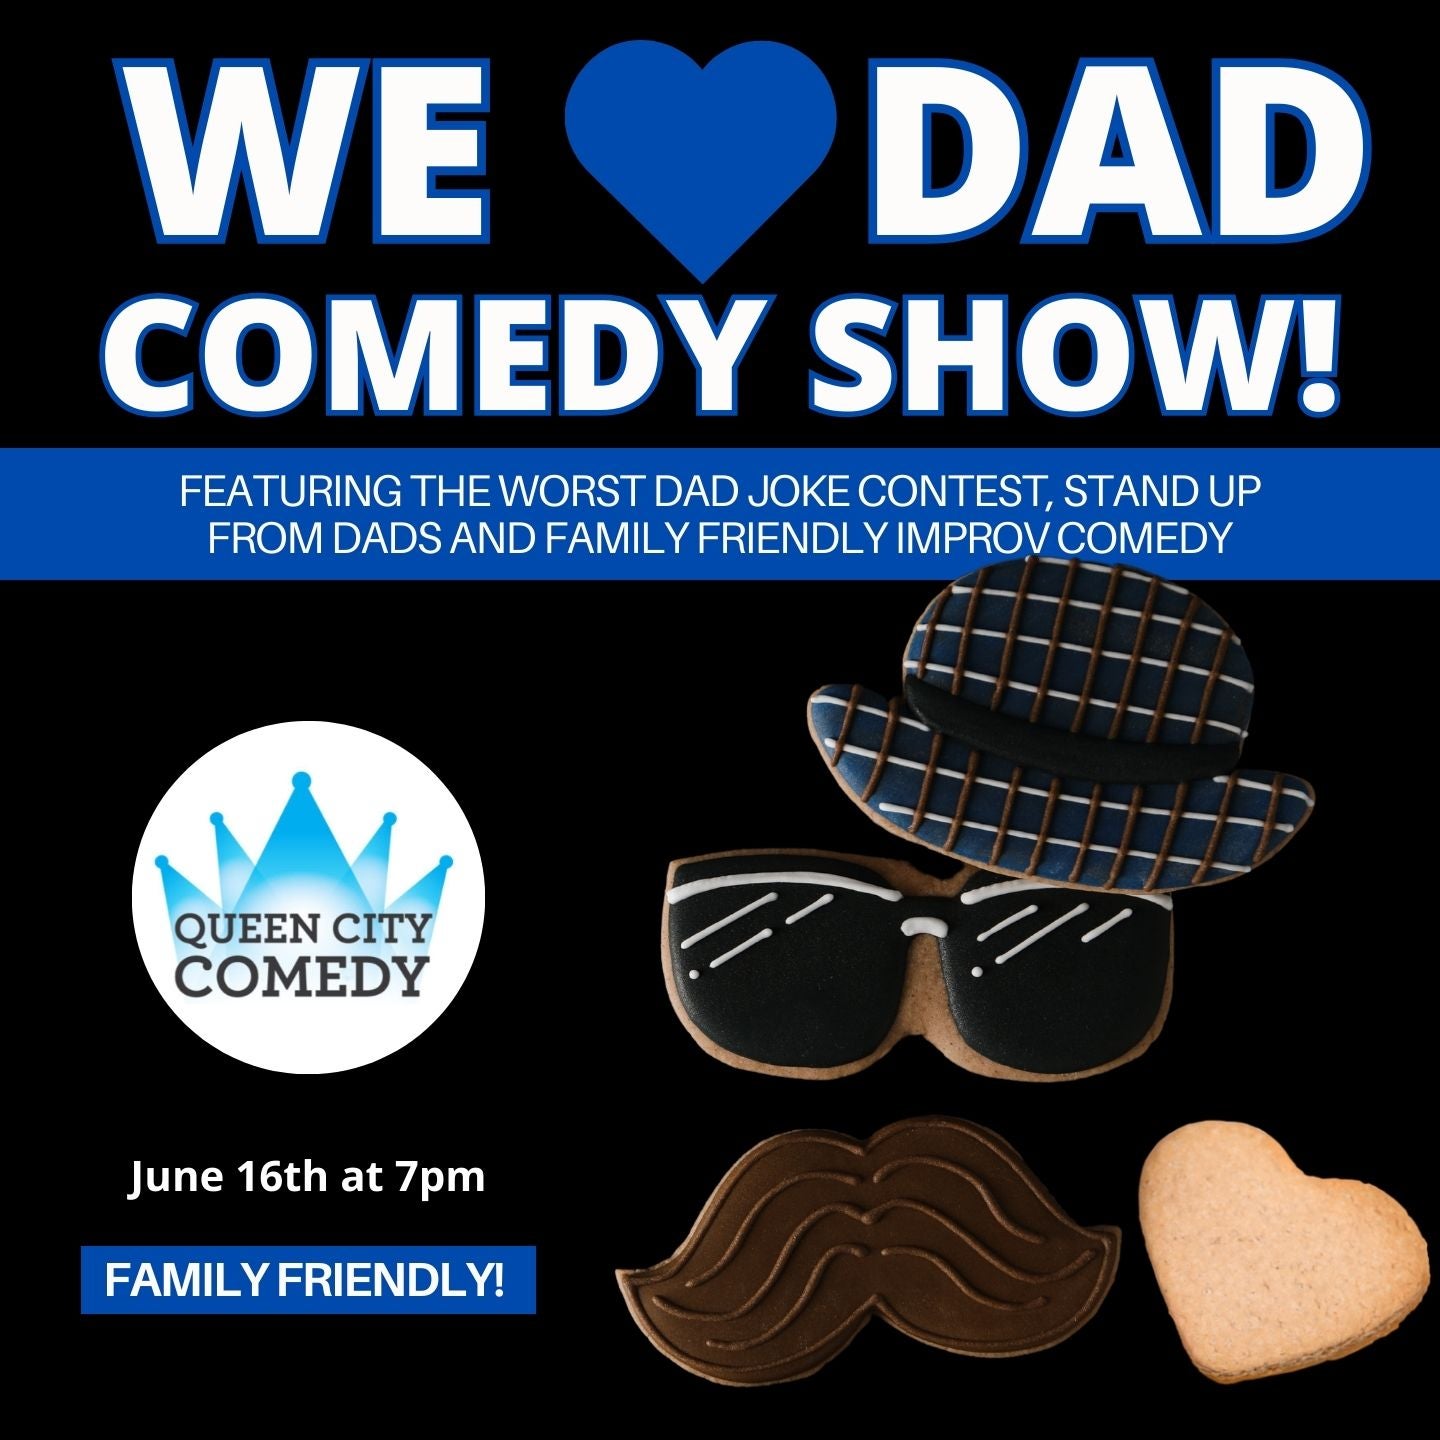 We Love Our Dads Comedy Show